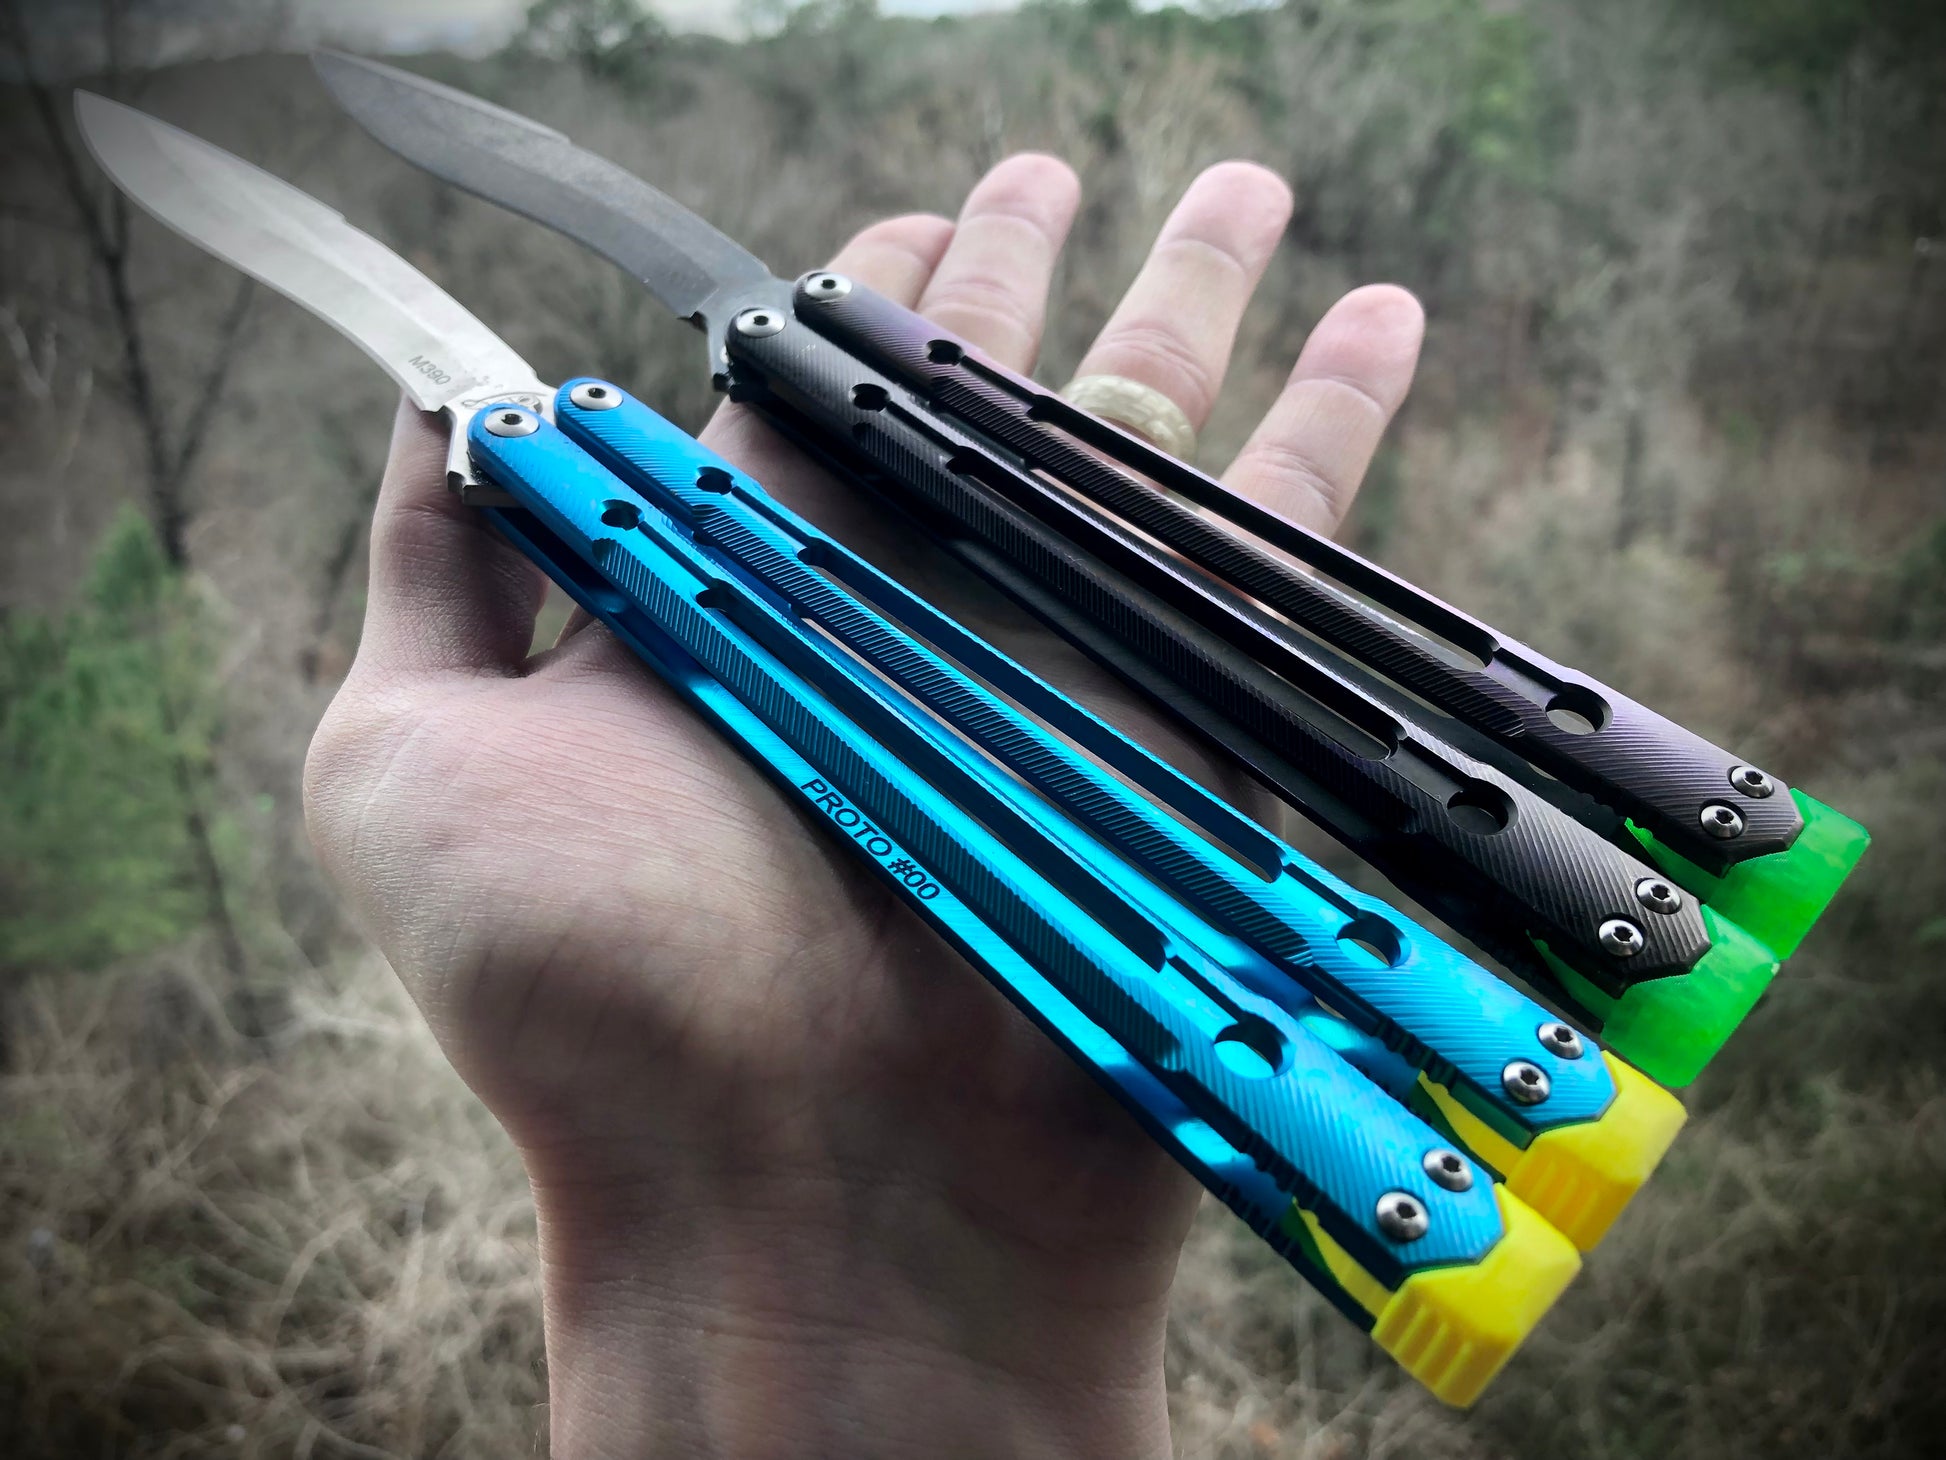 Improve the balance of your Black Balisong Reaper and Da Purge v2 balisongs with Zippy extension spacers. The spacers feature removable tungsten weights and positive jimping for an improved flipping experience.